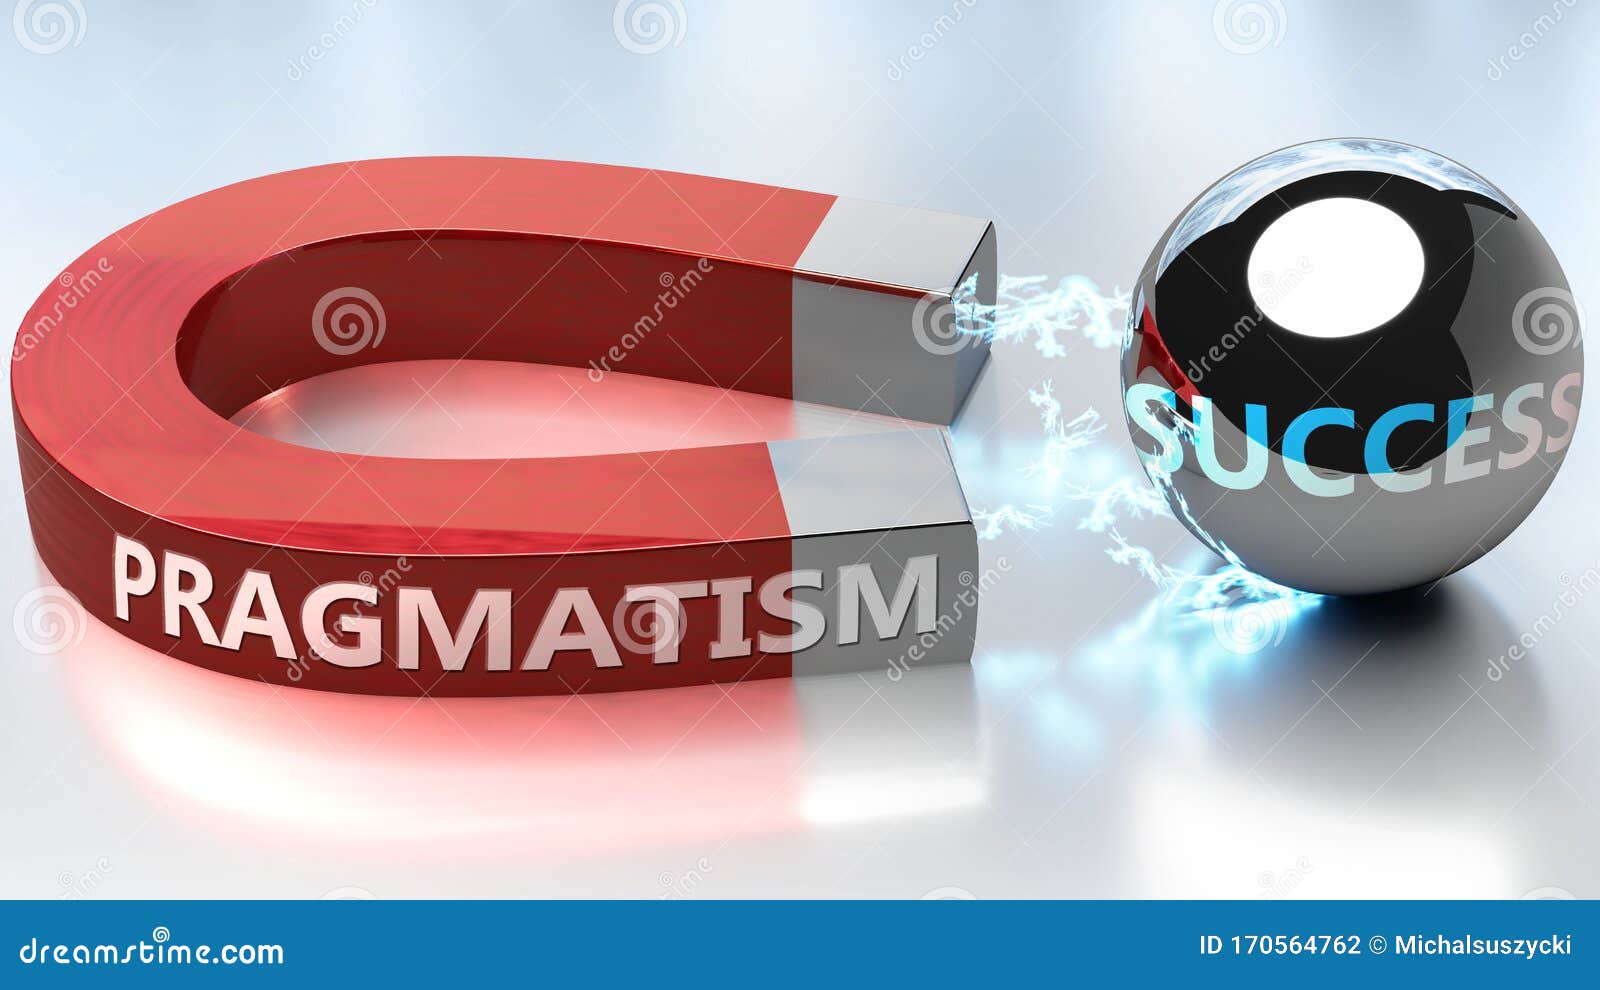 pragmatism helps achieving success - pictured as word pragmatism and a magnet, to ize that pragmatism attracts success in